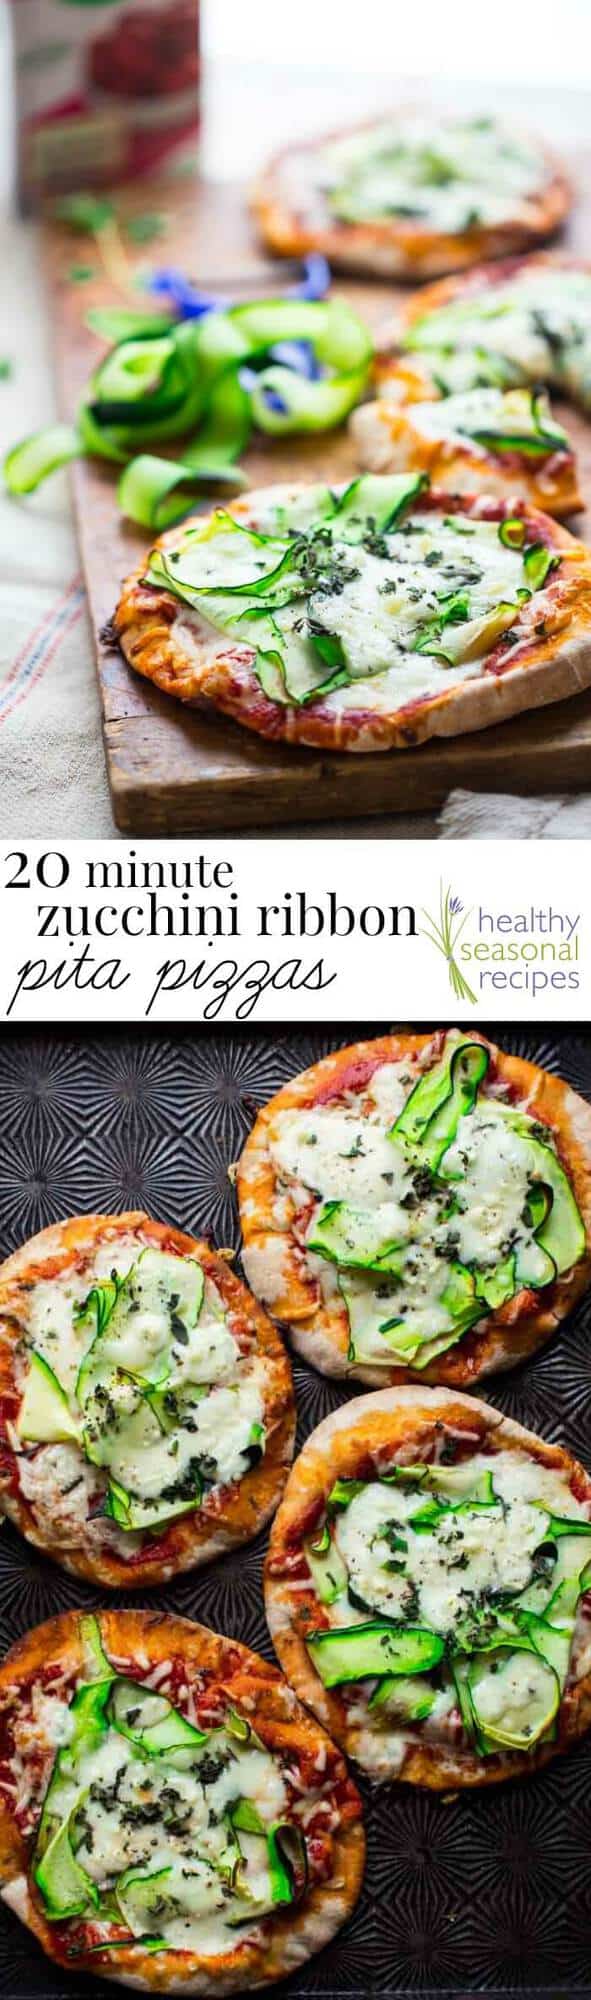 Pita pizza collage with text overlay